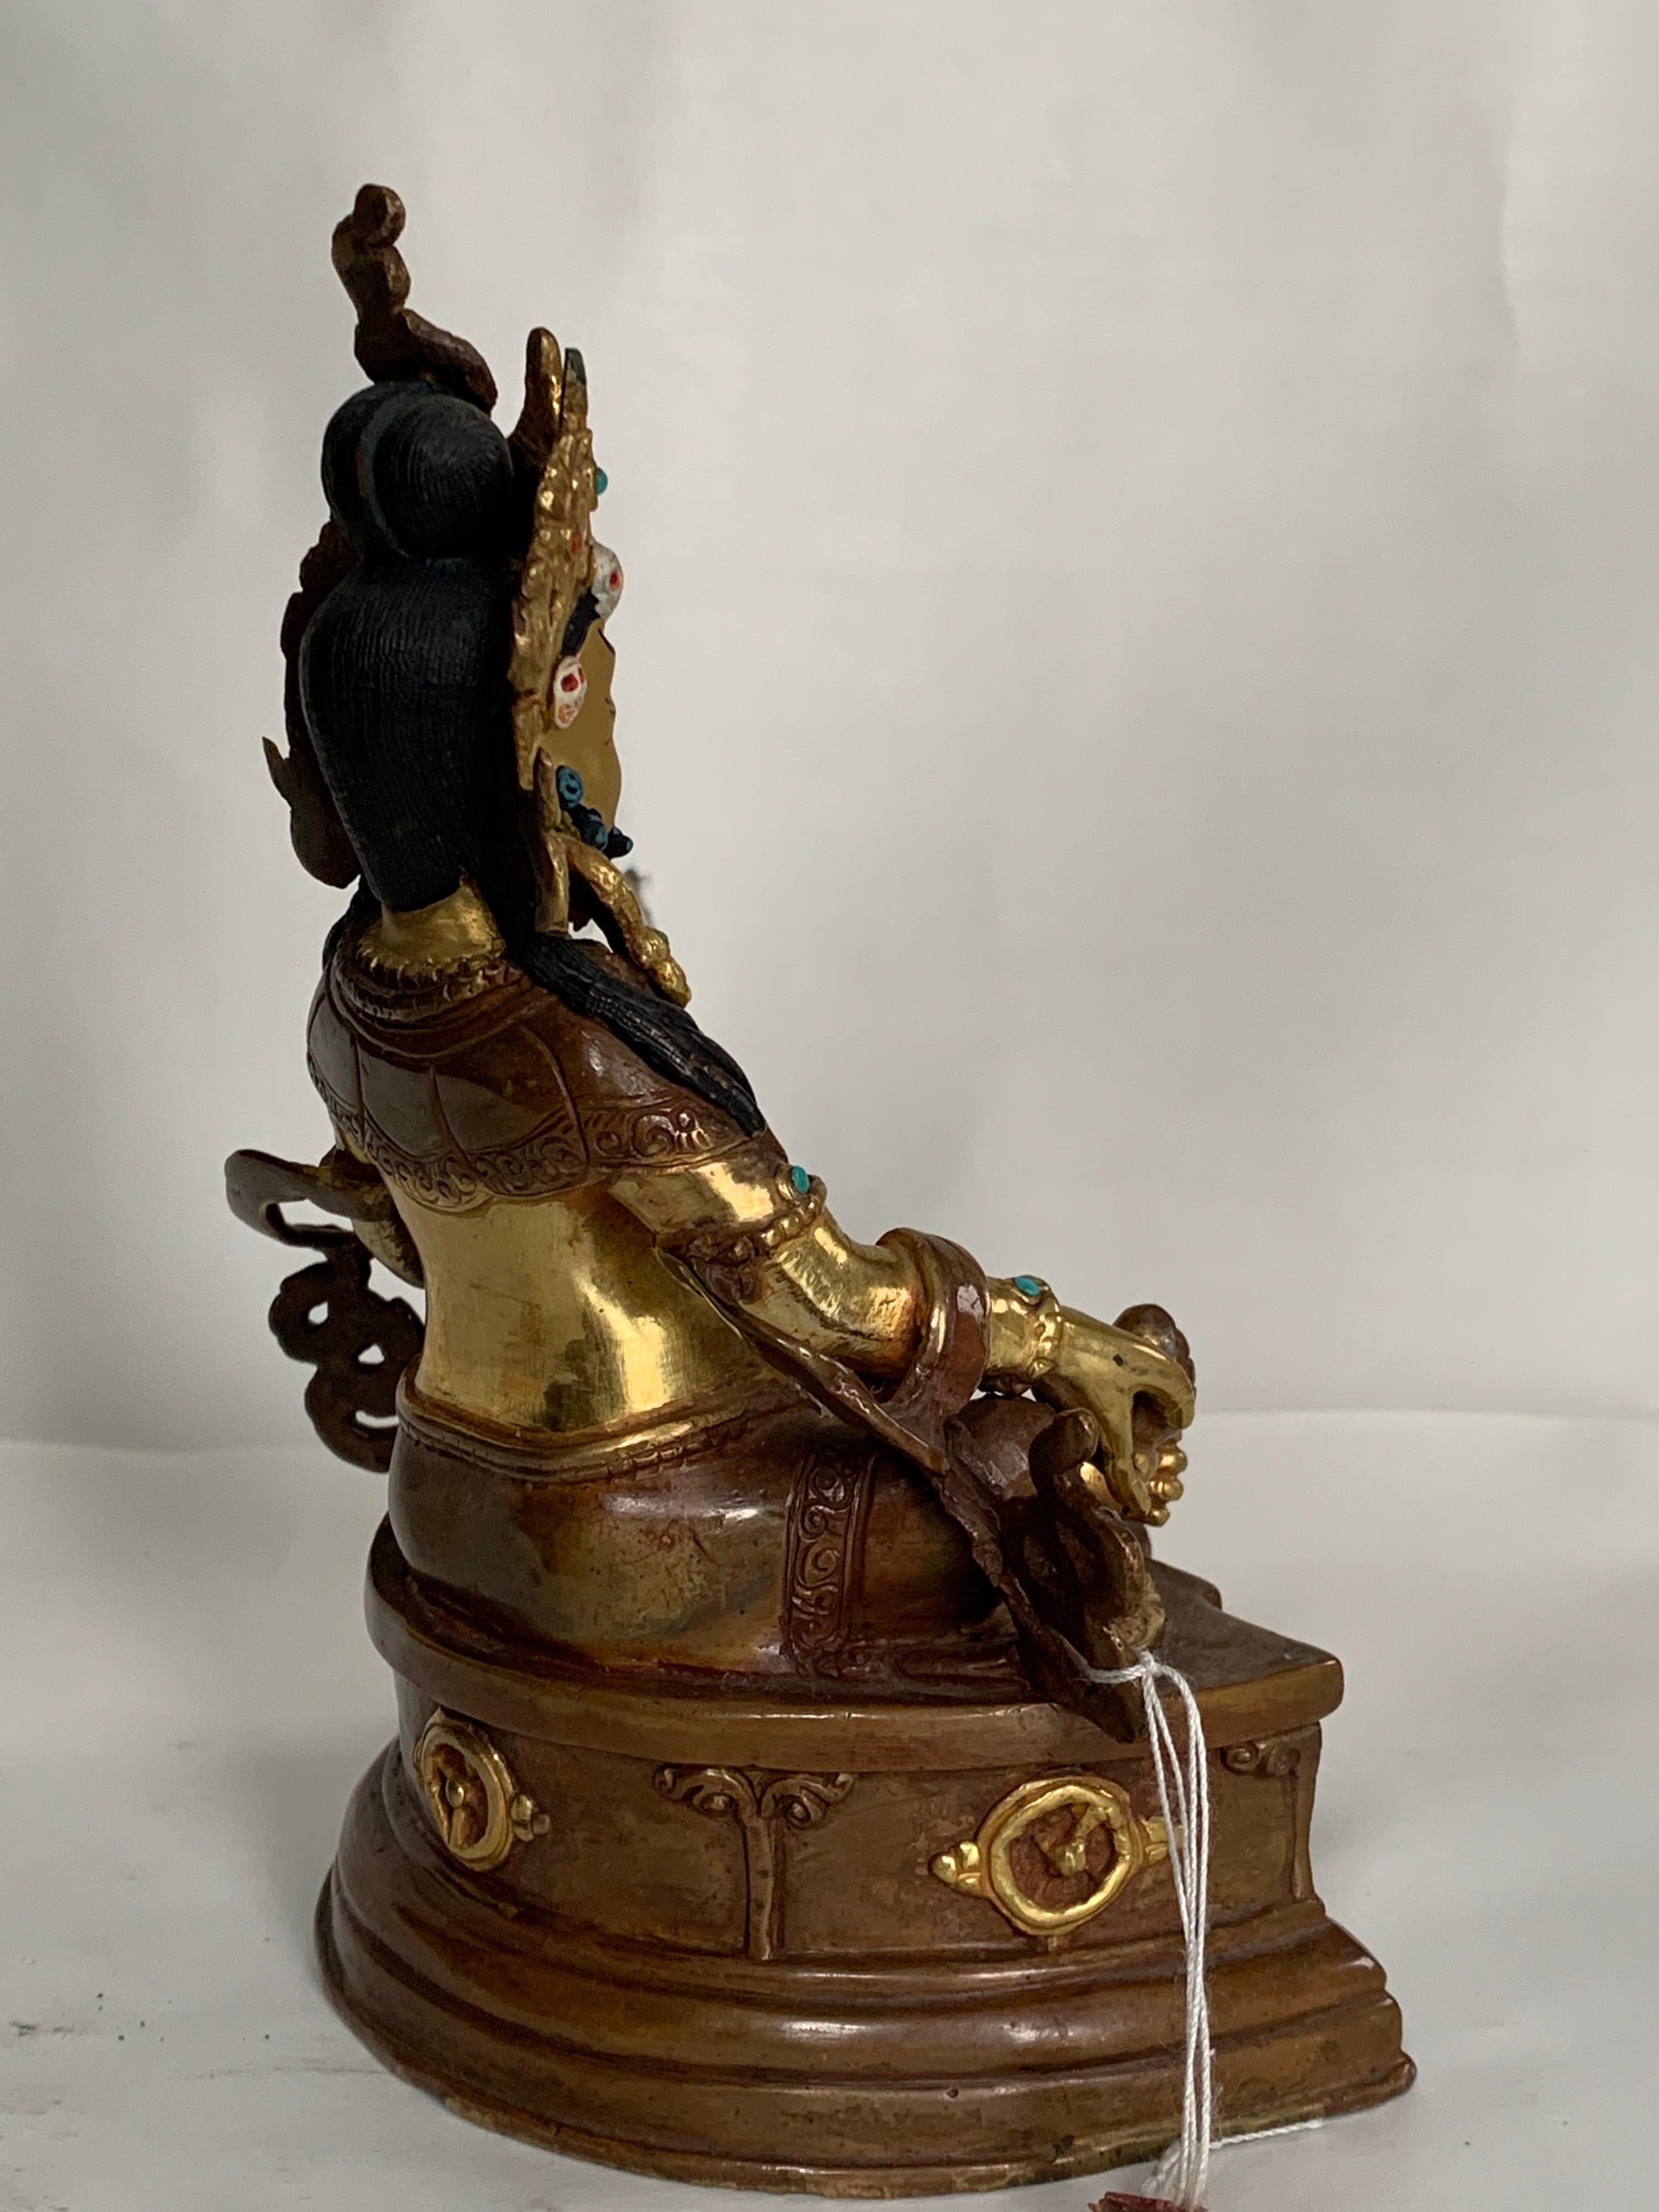 Kubera Statue 6 Inch with 24K Gold Handcrafted by Lost Wax Process - Other Art Style Sculpture by Unknown